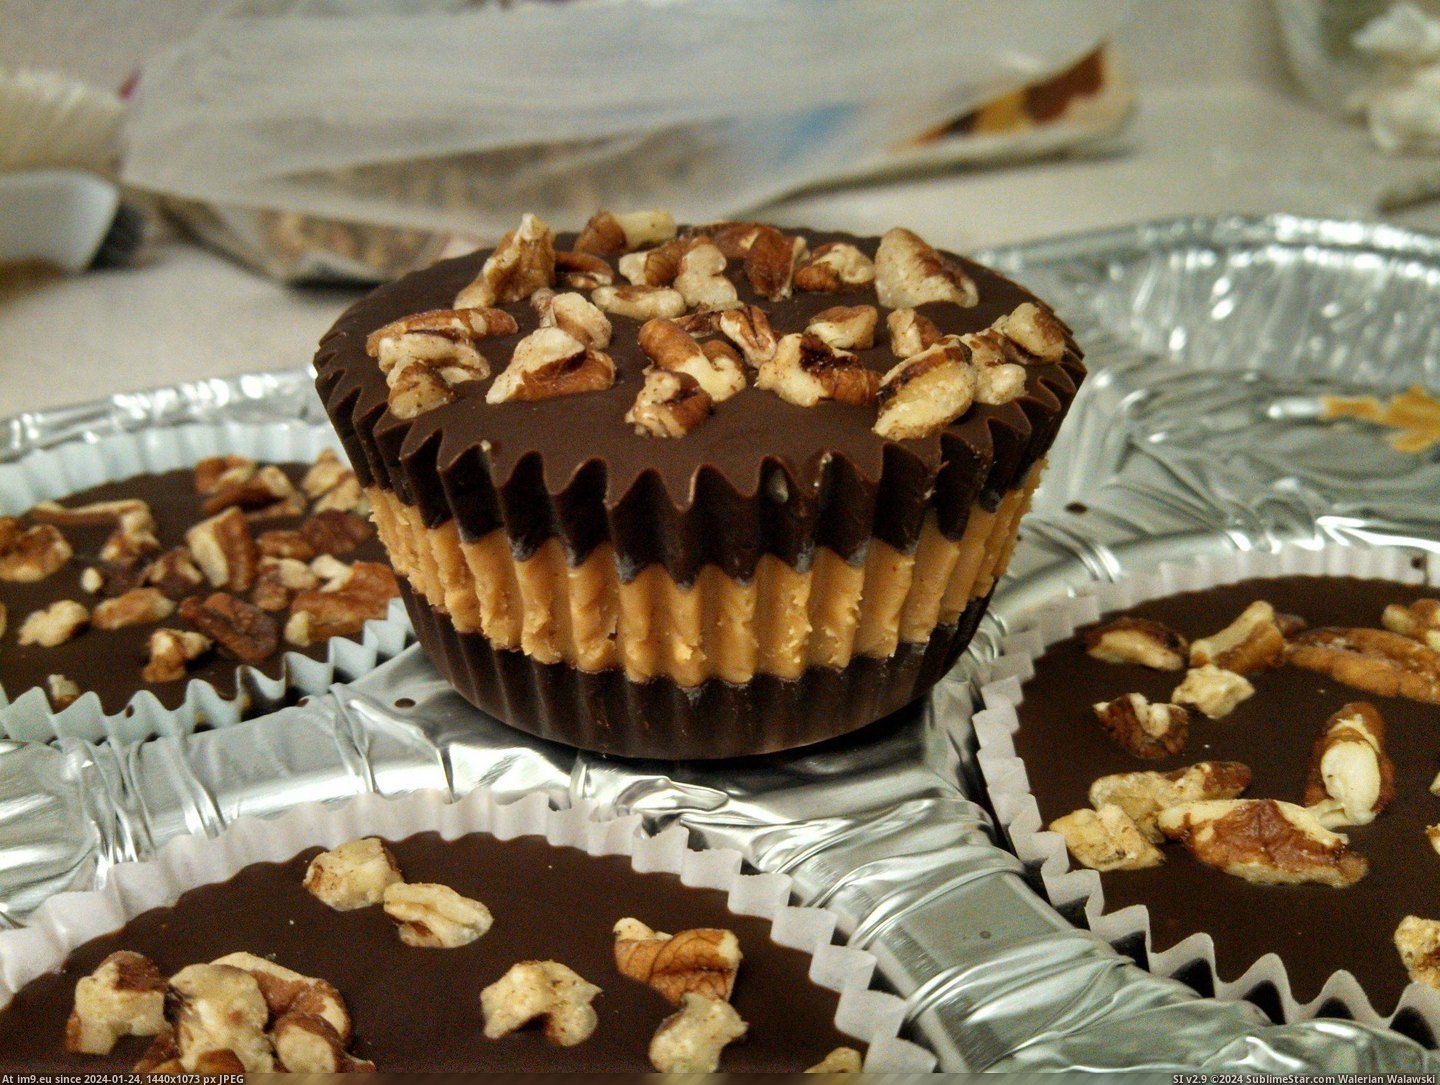 #Cup #Peanut #Butter #Homemade [Pics] Homemade Peanut Butter Cup Pic. (Image of album My r/PICS favs))